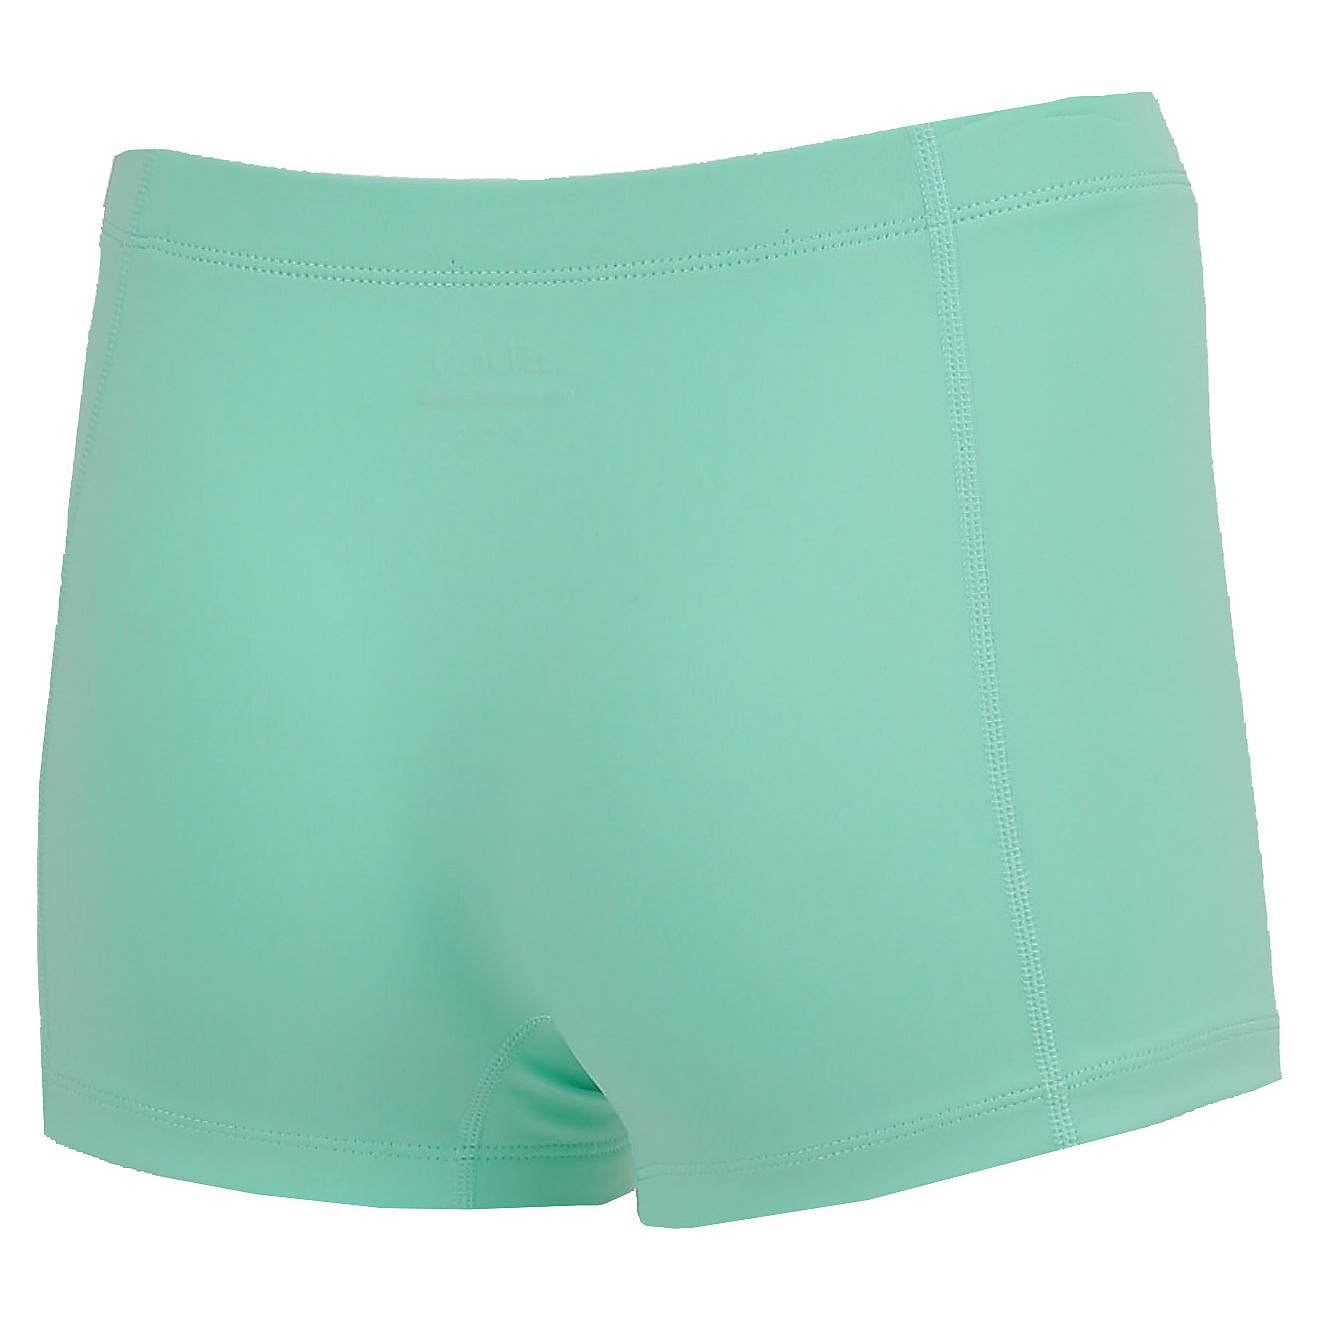 the shorts in light green